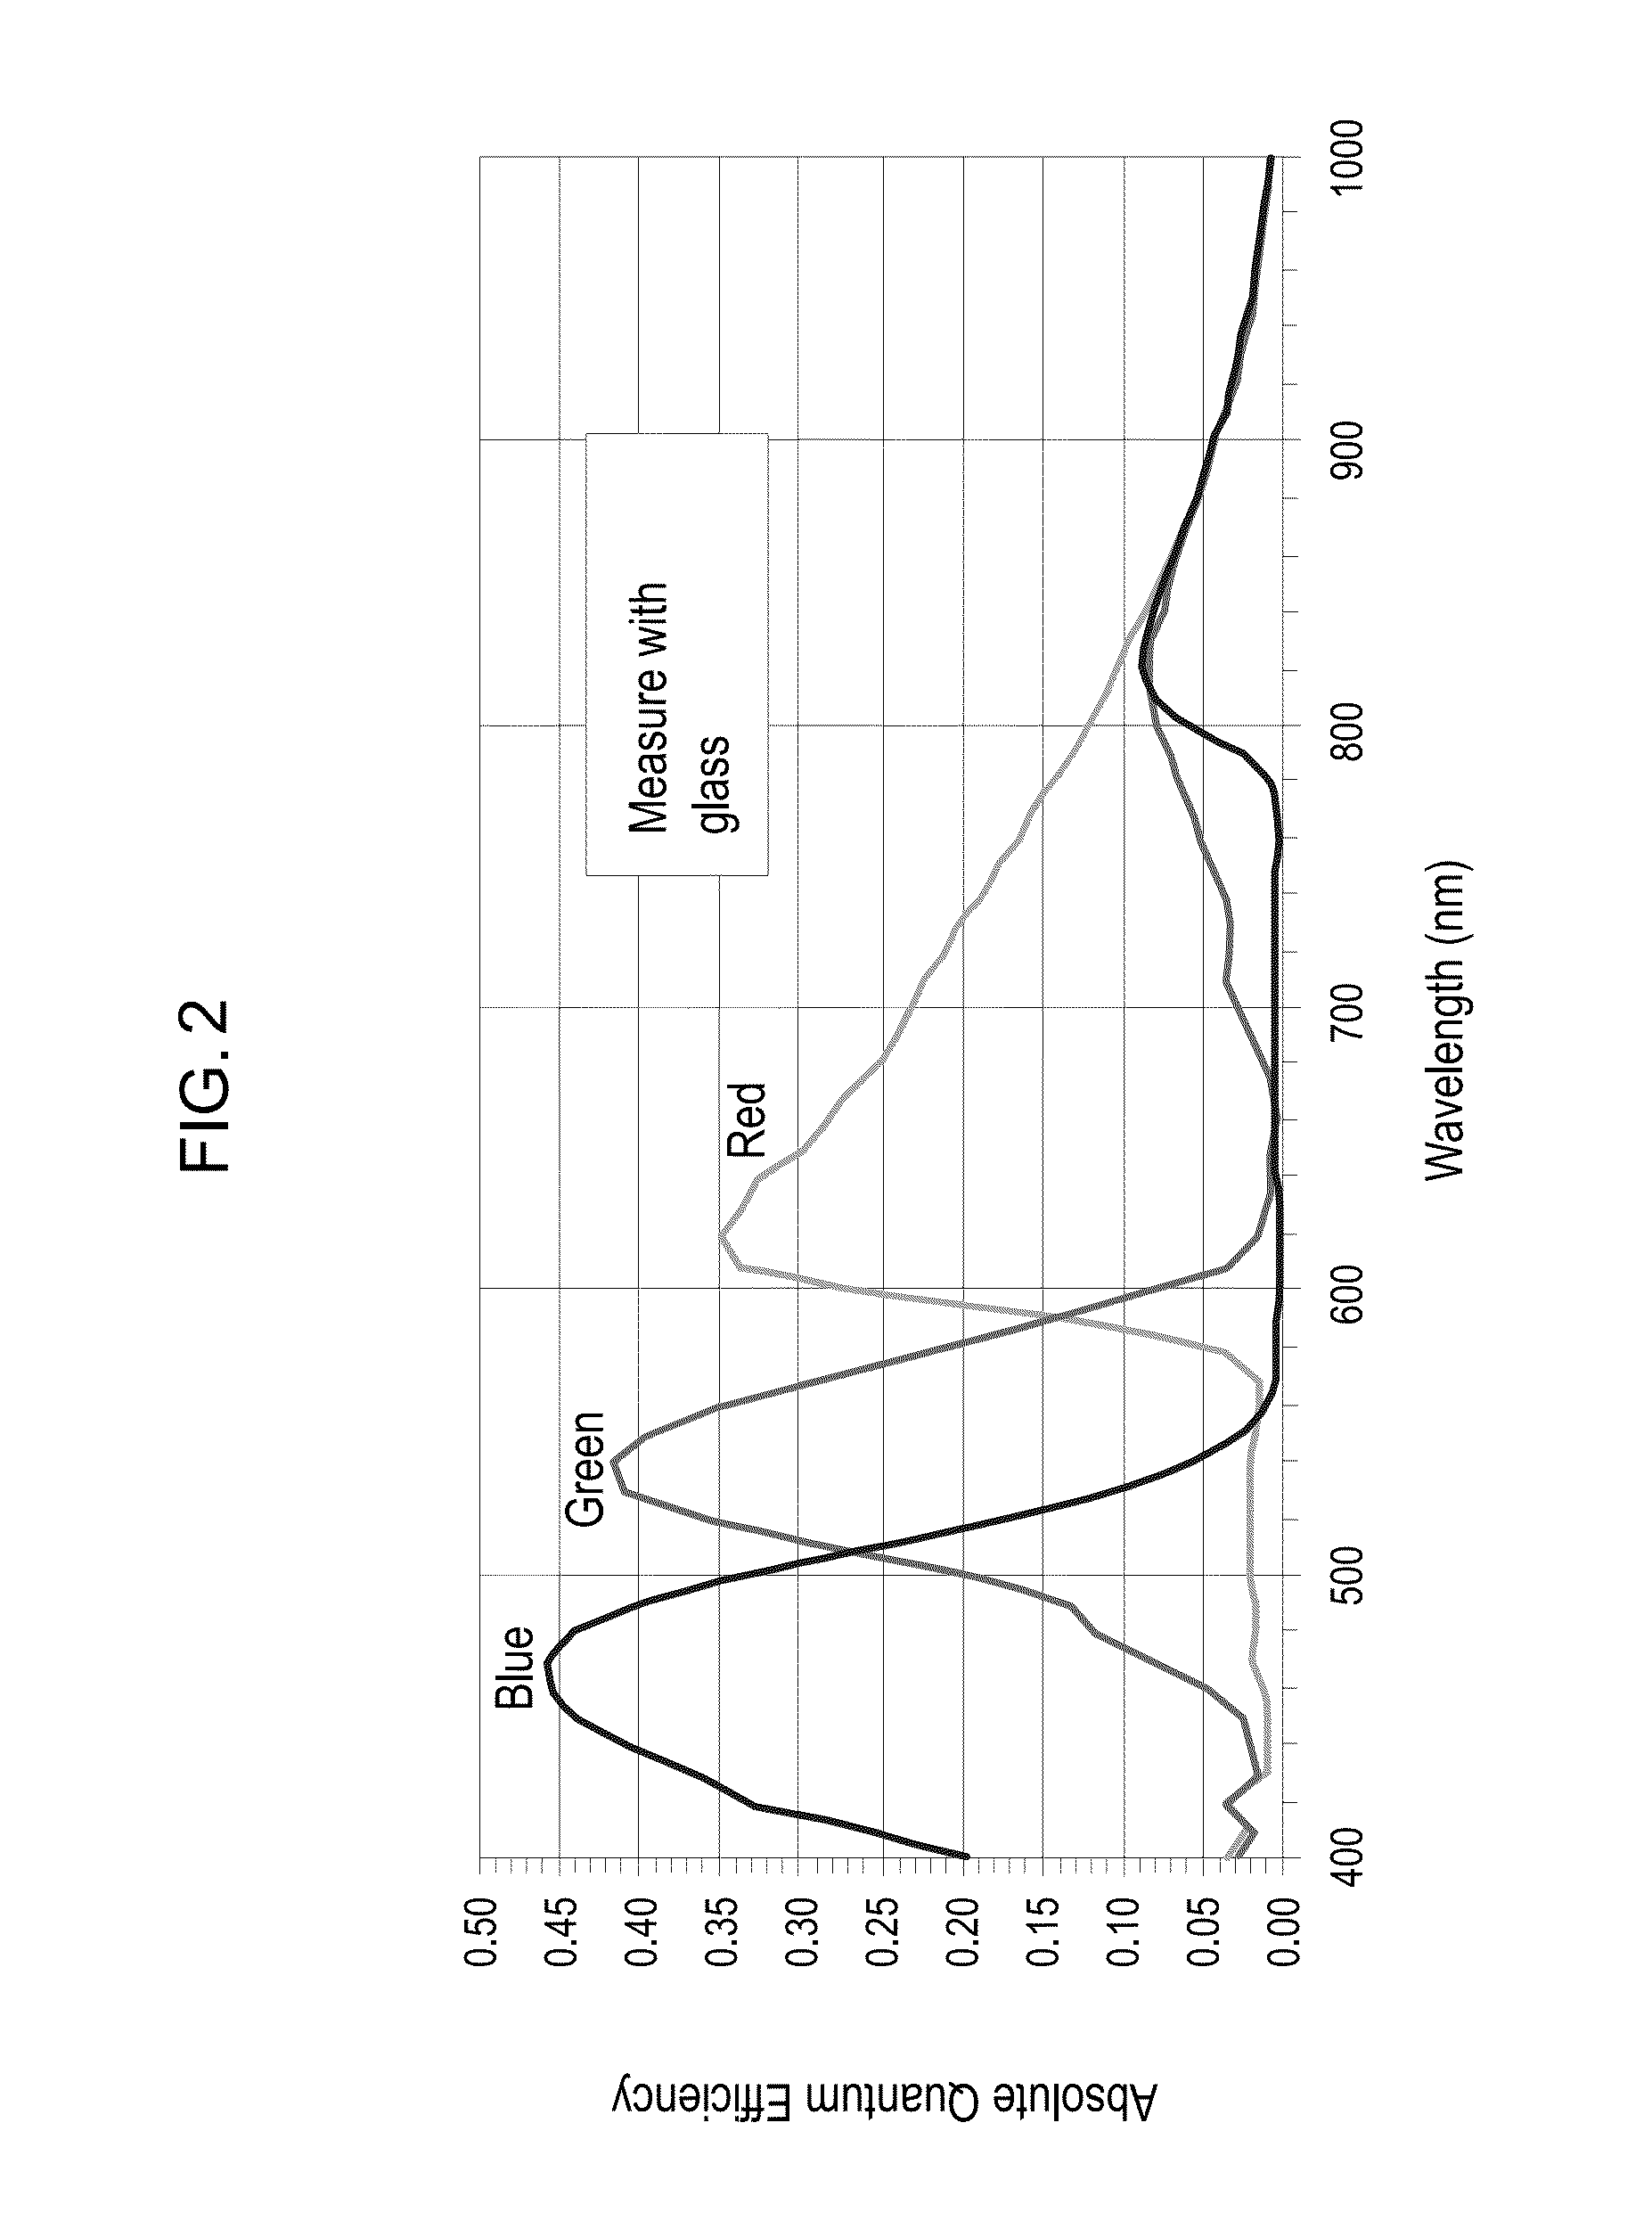 Systems and methods for recording simultaneously visible light image and infrared light image from fluorophores